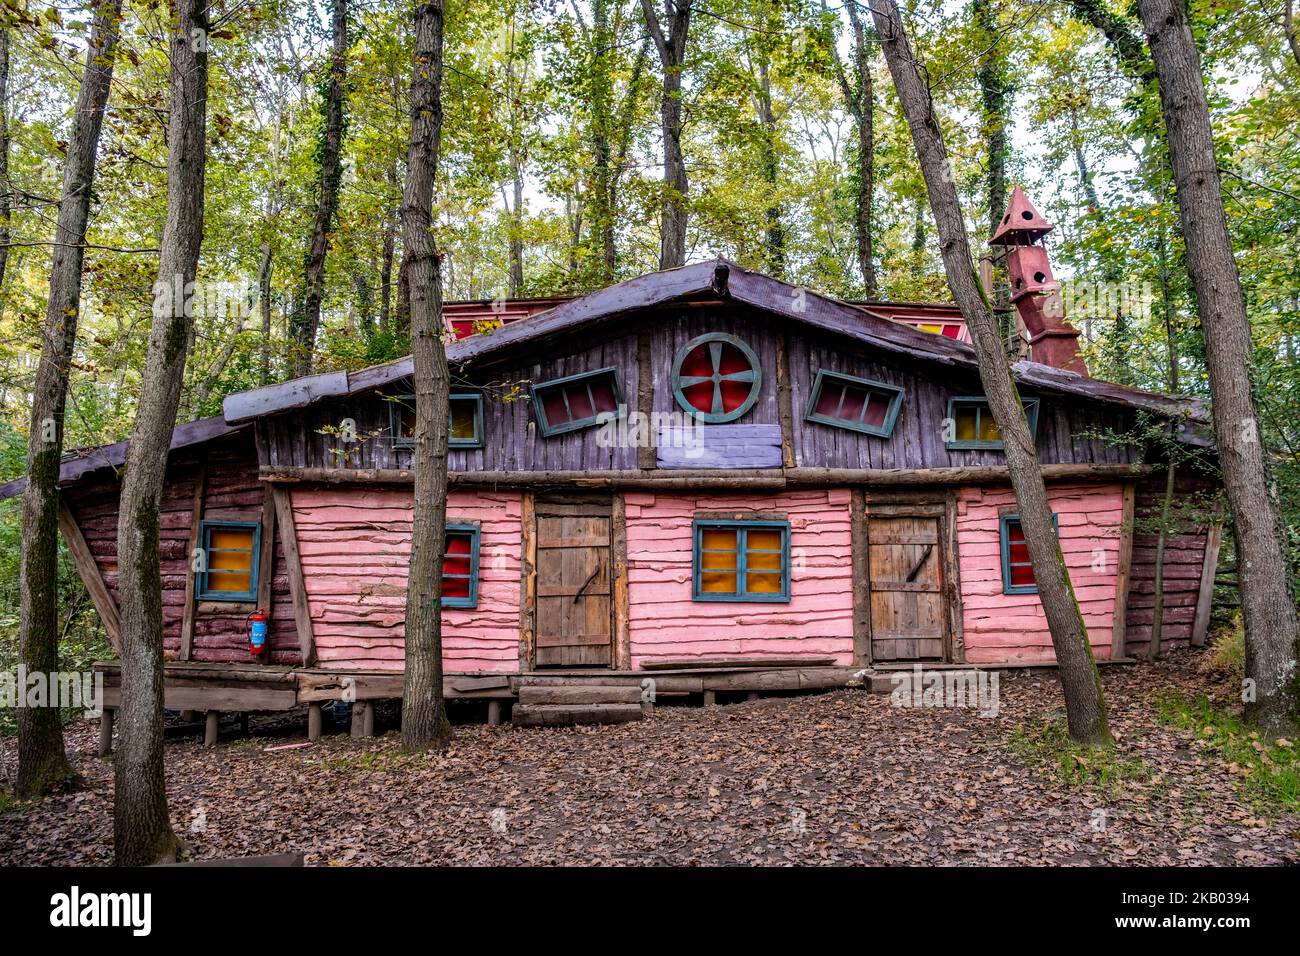 Izmit Ormanya City Park, Wooden colored houses inspired by the Hobbit film for tourism, Stock Photo